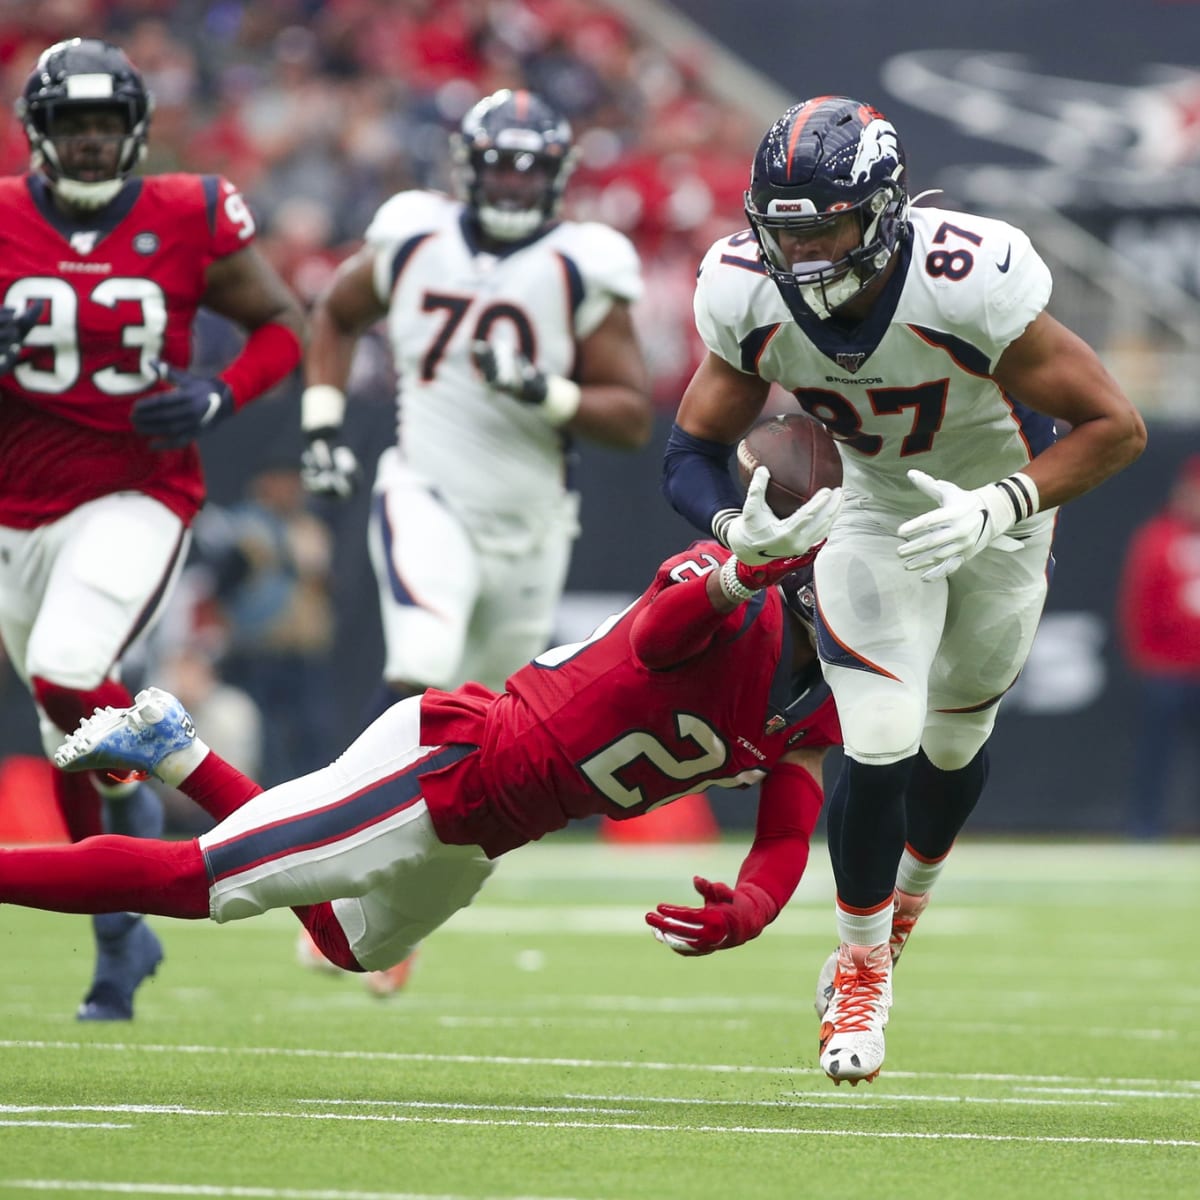 Broncos rookie Noah Fant in record-setting position after rocky